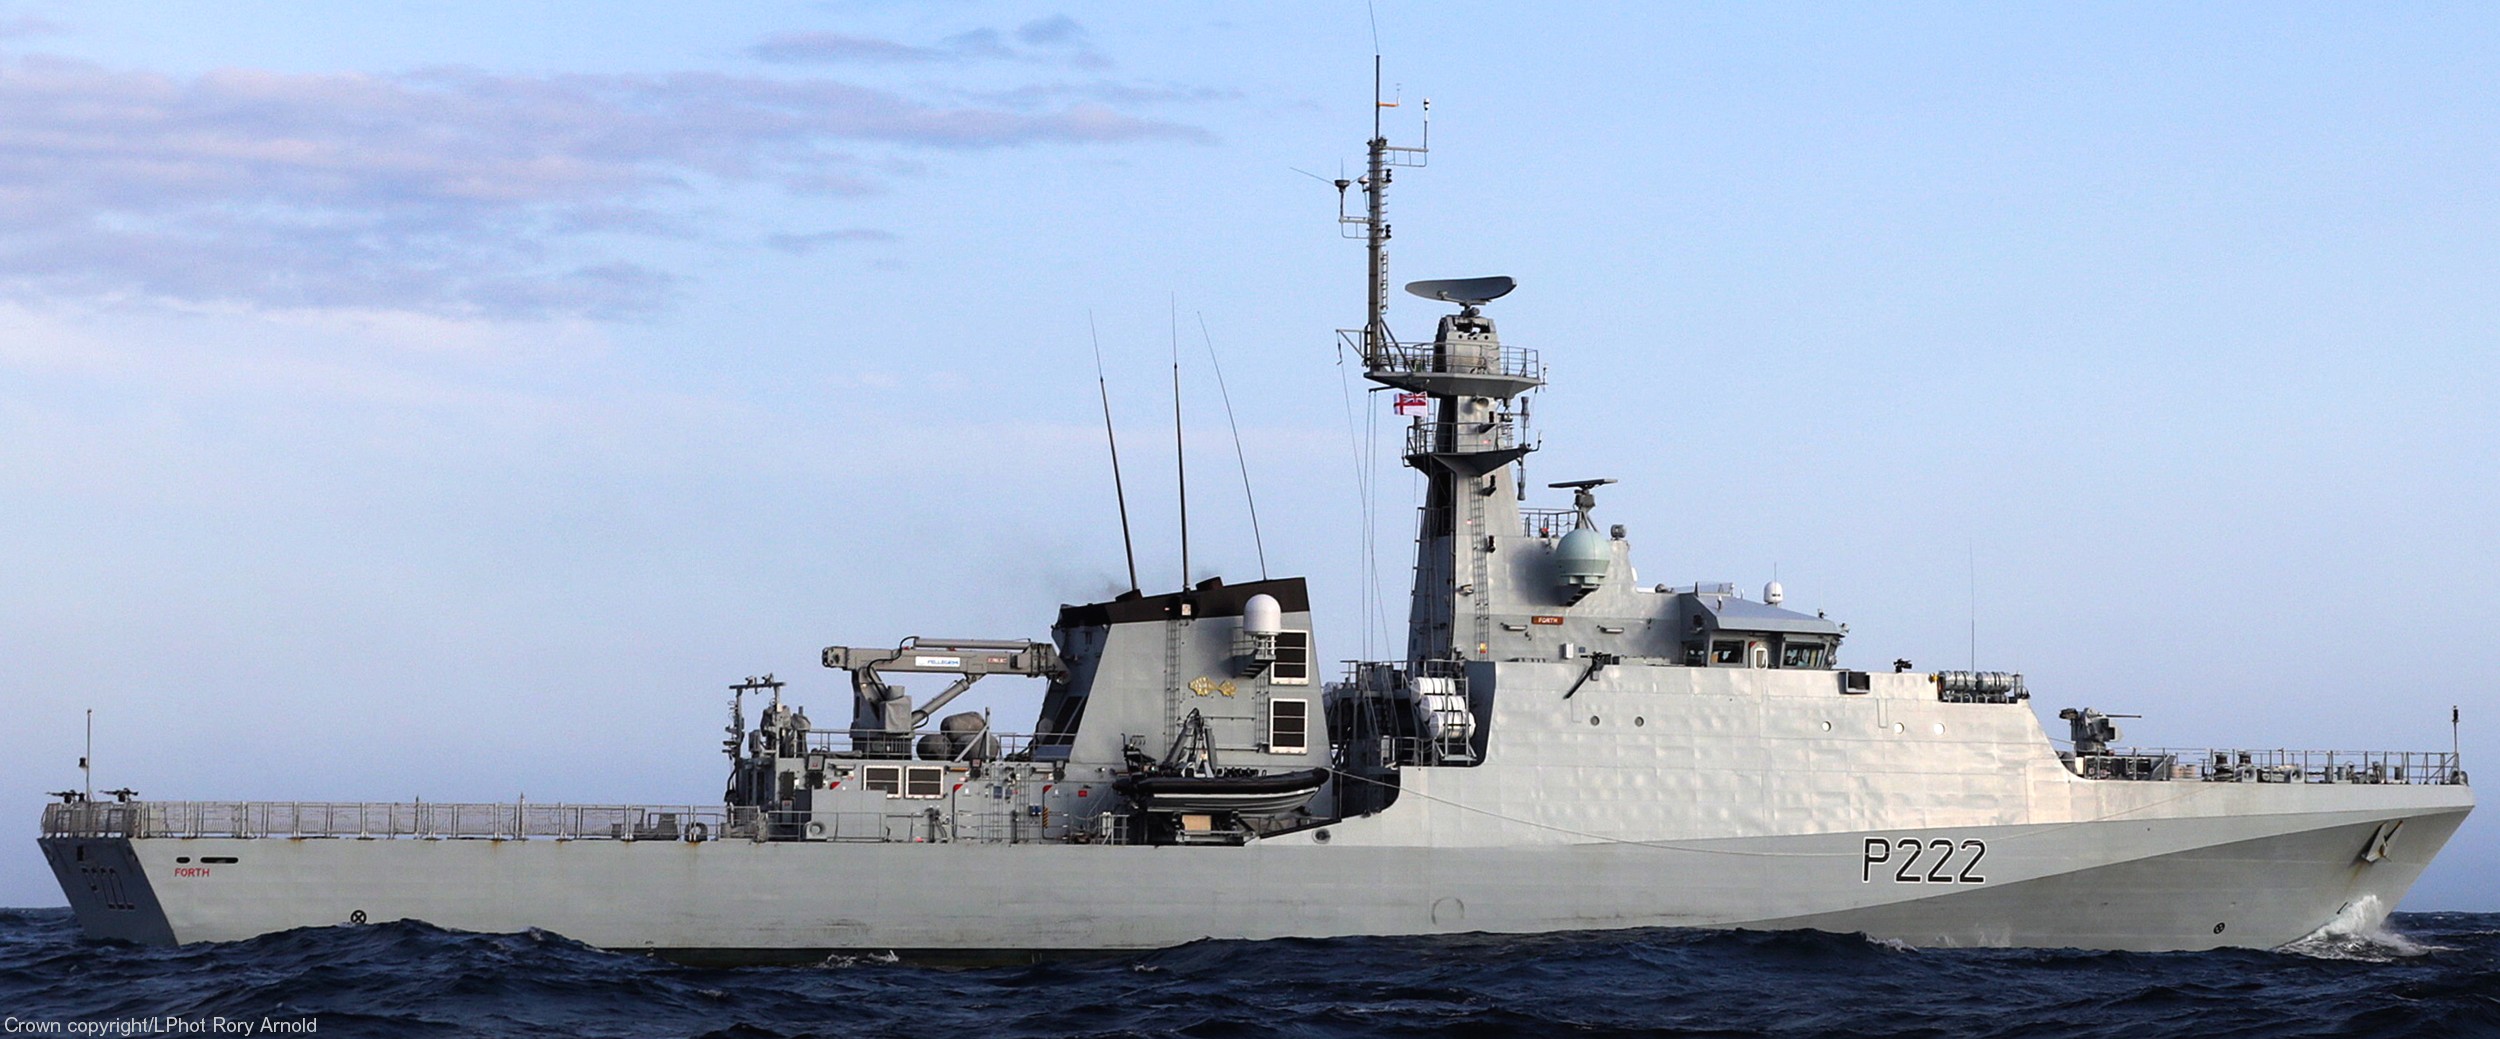 p-222 hms forth river class offshore patrol vessel opv royal navy 11